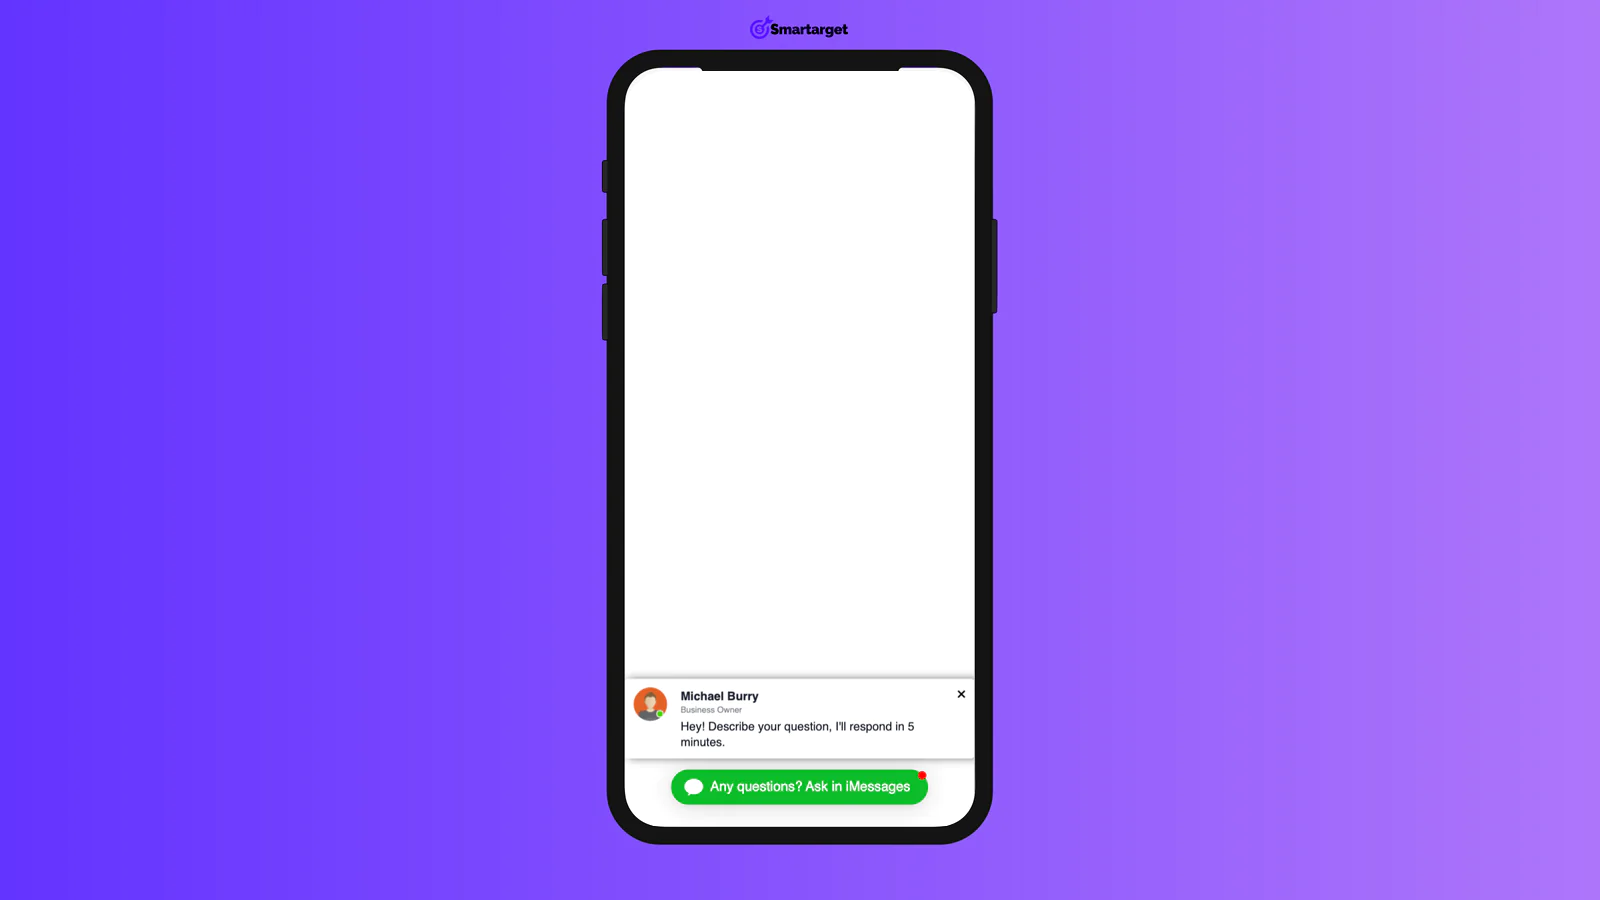 iMessages - Contact Us for Vuestorefront